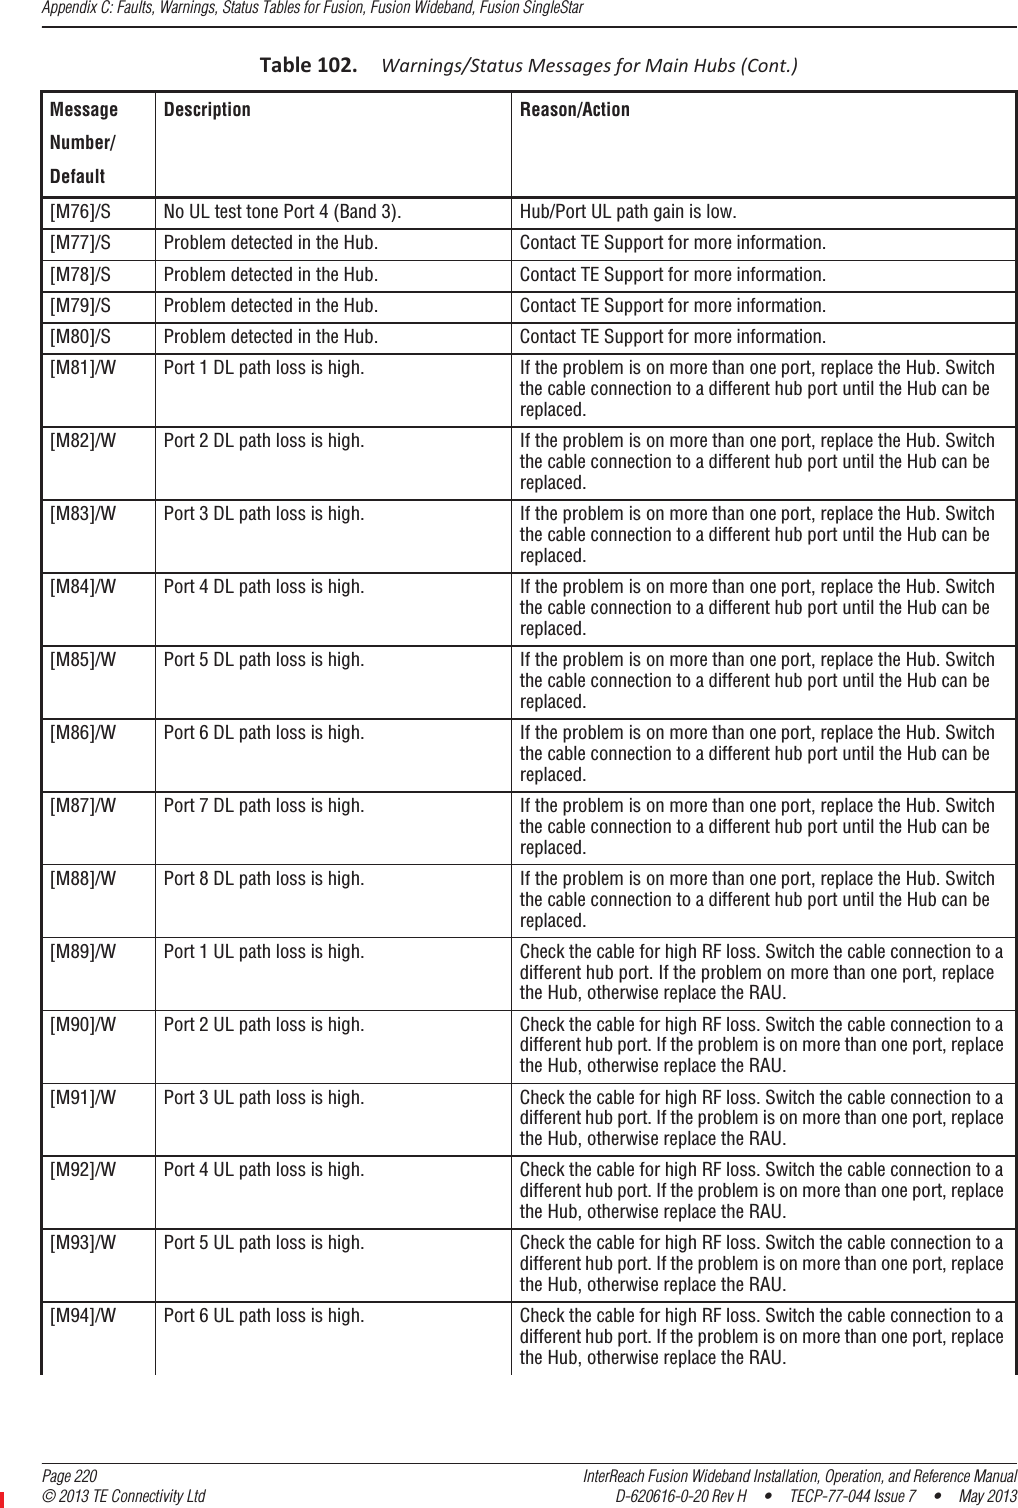 Appendix C: Faults, Warnings, Status Tables for Fusion, Fusion Wideband, Fusion SingleStar  Page 220 InterReach Fusion Wideband Installation, Operation, and Reference Manual© 2013 TE Connectivity Ltd D-620616-0-20 Rev H  •  TECP-77-044 Issue 7  •  May 2013[M76]/S No UL test tone Port 4 (Band 3). Hub/Port UL path gain is low.[M77]/S Problem detected in the Hub. Contact TE Support for more information.[M78]/S Problem detected in the Hub. Contact TE Support for more information.[M79]/S Problem detected in the Hub. Contact TE Support for more information.[M80]/S Problem detected in the Hub. Contact TE Support for more information.[M81]/W Port 1 DL path loss is high. If the problem is on more than one port, replace the Hub. Switch the cable connection to a different hub port until the Hub can be replaced.[M82]/W Port 2 DL path loss is high. If the problem is on more than one port, replace the Hub. Switch the cable connection to a different hub port until the Hub can be replaced.[M83]/W Port 3 DL path loss is high. If the problem is on more than one port, replace the Hub. Switch the cable connection to a different hub port until the Hub can be replaced.[M84]/W Port 4 DL path loss is high. If the problem is on more than one port, replace the Hub. Switch the cable connection to a different hub port until the Hub can be replaced.[M85]/W Port 5 DL path loss is high. If the problem is on more than one port, replace the Hub. Switch the cable connection to a different hub port until the Hub can be replaced.[M86]/W Port 6 DL path loss is high. If the problem is on more than one port, replace the Hub. Switch the cable connection to a different hub port until the Hub can be replaced.[M87]/W Port 7 DL path loss is high. If the problem is on more than one port, replace the Hub. Switch the cable connection to a different hub port until the Hub can be replaced.[M88]/W Port 8 DL path loss is high. If the problem is on more than one port, replace the Hub. Switch the cable connection to a different hub port until the Hub can be replaced.[M89]/W Port 1 UL path loss is high. Check the cable for high RF loss. Switch the cable connection to a different hub port. If the problem on more than one port, replace the Hub, otherwise replace the RAU.[M90]/W Port 2 UL path loss is high. Check the cable for high RF loss. Switch the cable connection to a different hub port. If the problem is on more than one port, replace the Hub, otherwise replace the RAU.[M91]/W Port 3 UL path loss is high. Check the cable for high RF loss. Switch the cable connection to a different hub port. If the problem is on more than one port, replace the Hub, otherwise replace the RAU.[M92]/W Port 4 UL path loss is high. Check the cable for high RF loss. Switch the cable connection to a different hub port. If the problem is on more than one port, replace the Hub, otherwise replace the RAU.[M93]/W Port 5 UL path loss is high. Check the cable for high RF loss. Switch the cable connection to a different hub port. If the problem is on more than one port, replace the Hub, otherwise replace the RAU.[M94]/W Port 6 UL path loss is high. Check the cable for high RF loss. Switch the cable connection to a different hub port. If the problem is on more than one port, replace the Hub, otherwise replace the RAU.Table102.Warnings/StatusMessagesforMainHubs(Cont.)Message Number/DefaultDescription Reason/Action